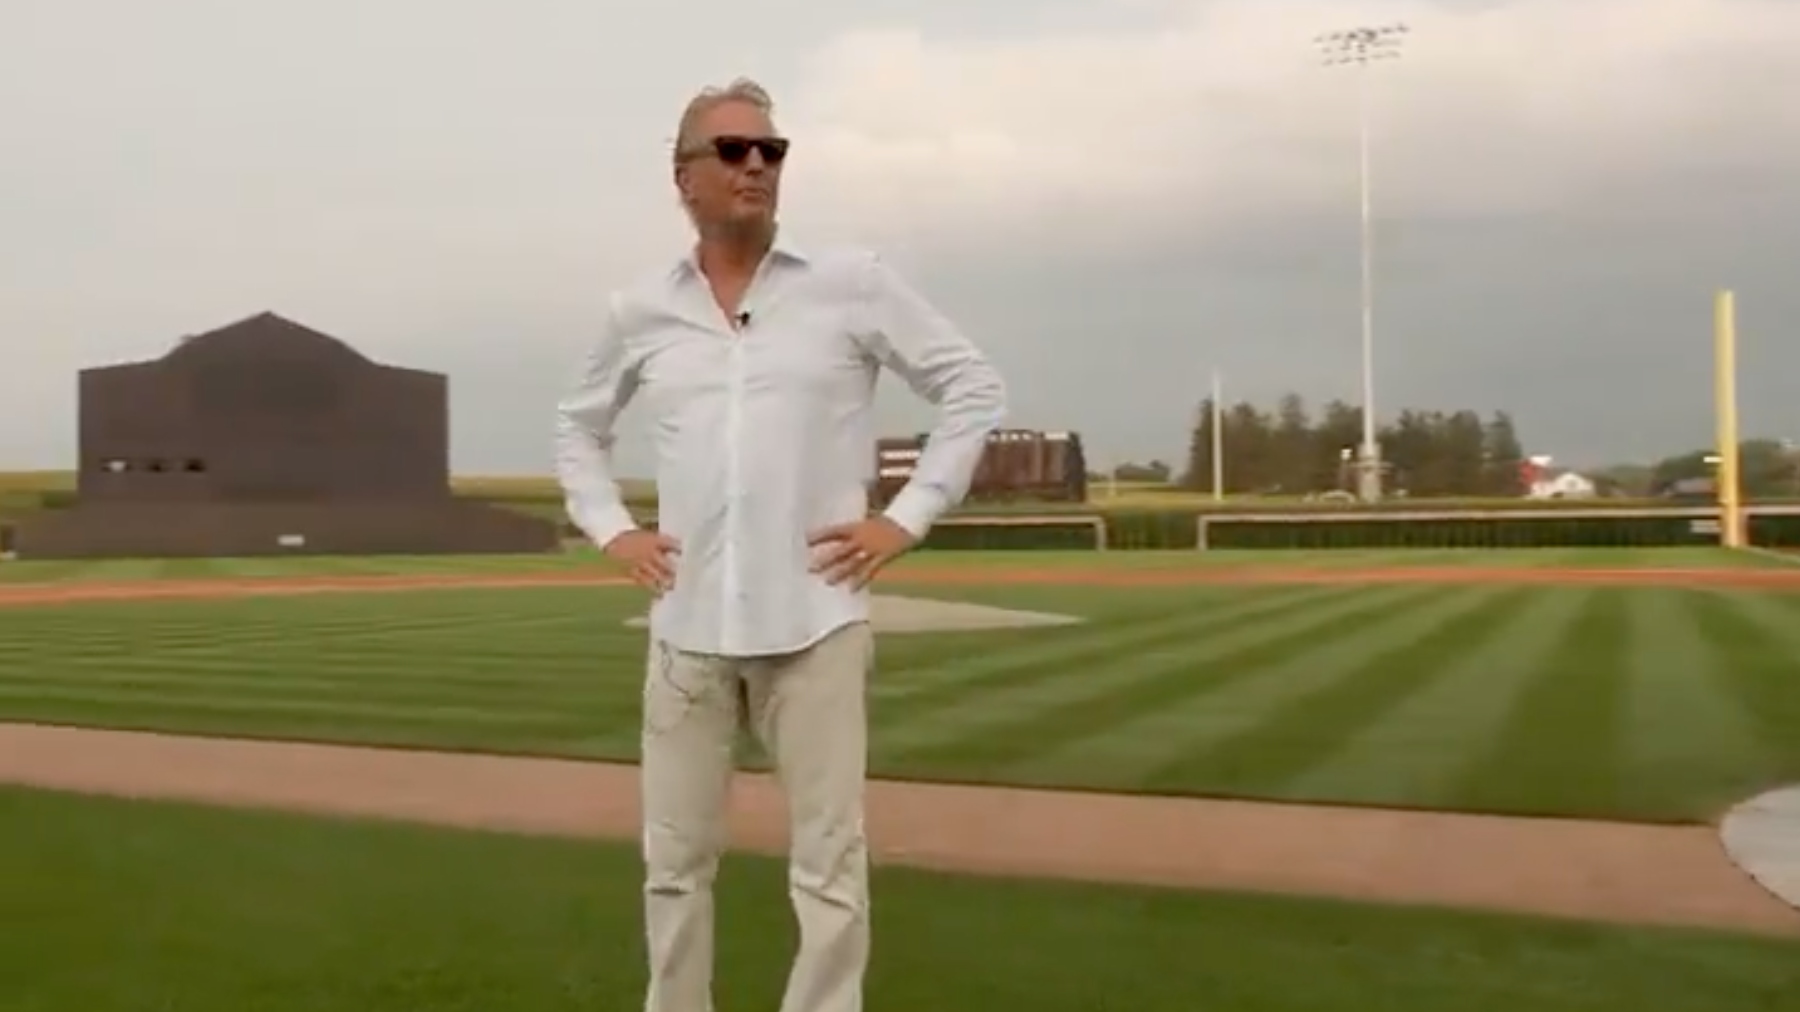 Chicago White Sox holding ticket raffle for 'Field of Dreams' game